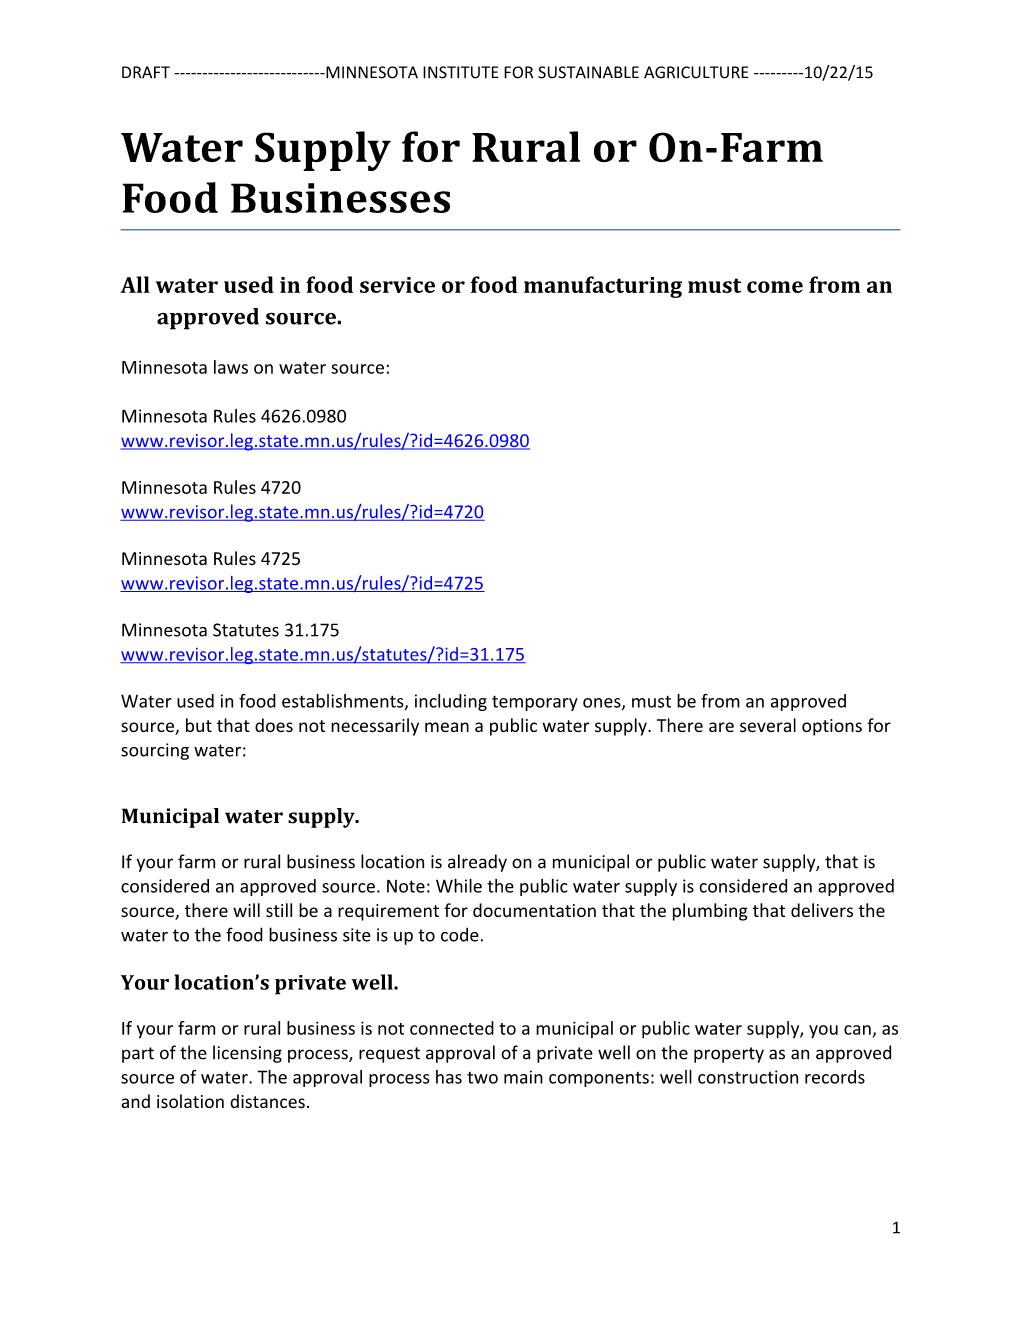 Water Supply for Rural Or On-Farm Food Businesses